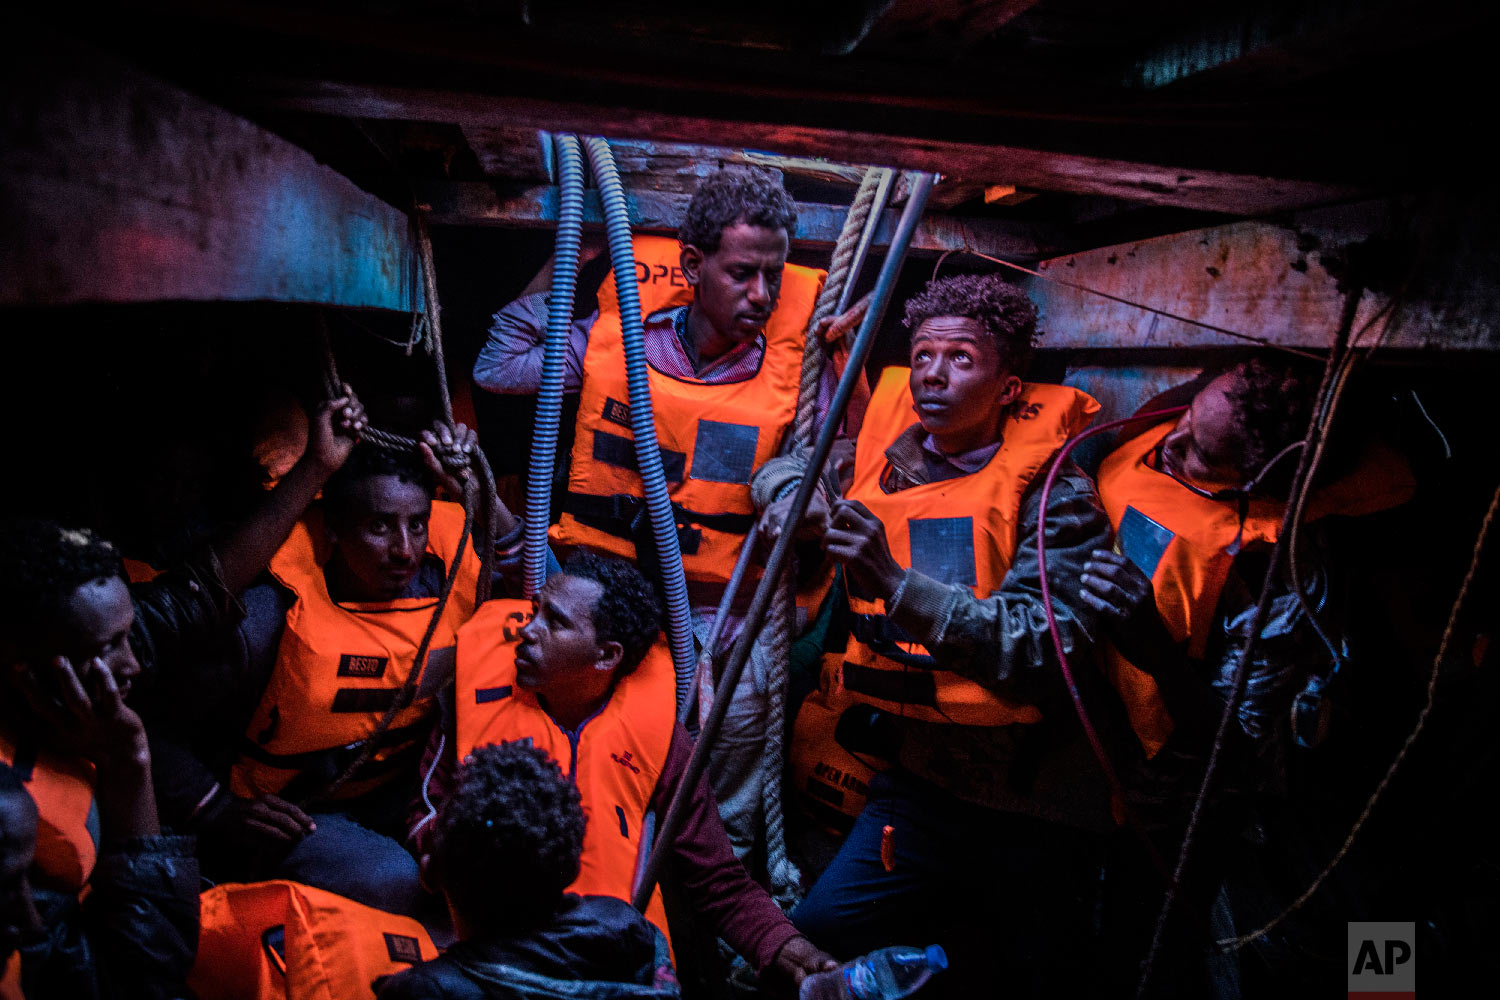  Sub-Saharan refugees and migrants, mostly from Eritrea, wait to be rescued by aid workers of Spanish NGO Proactiva Open Arms, in the lower deck of a wooden as they were trying to leave the Libyan coast and reach European soil, 34 miles north of Kasr